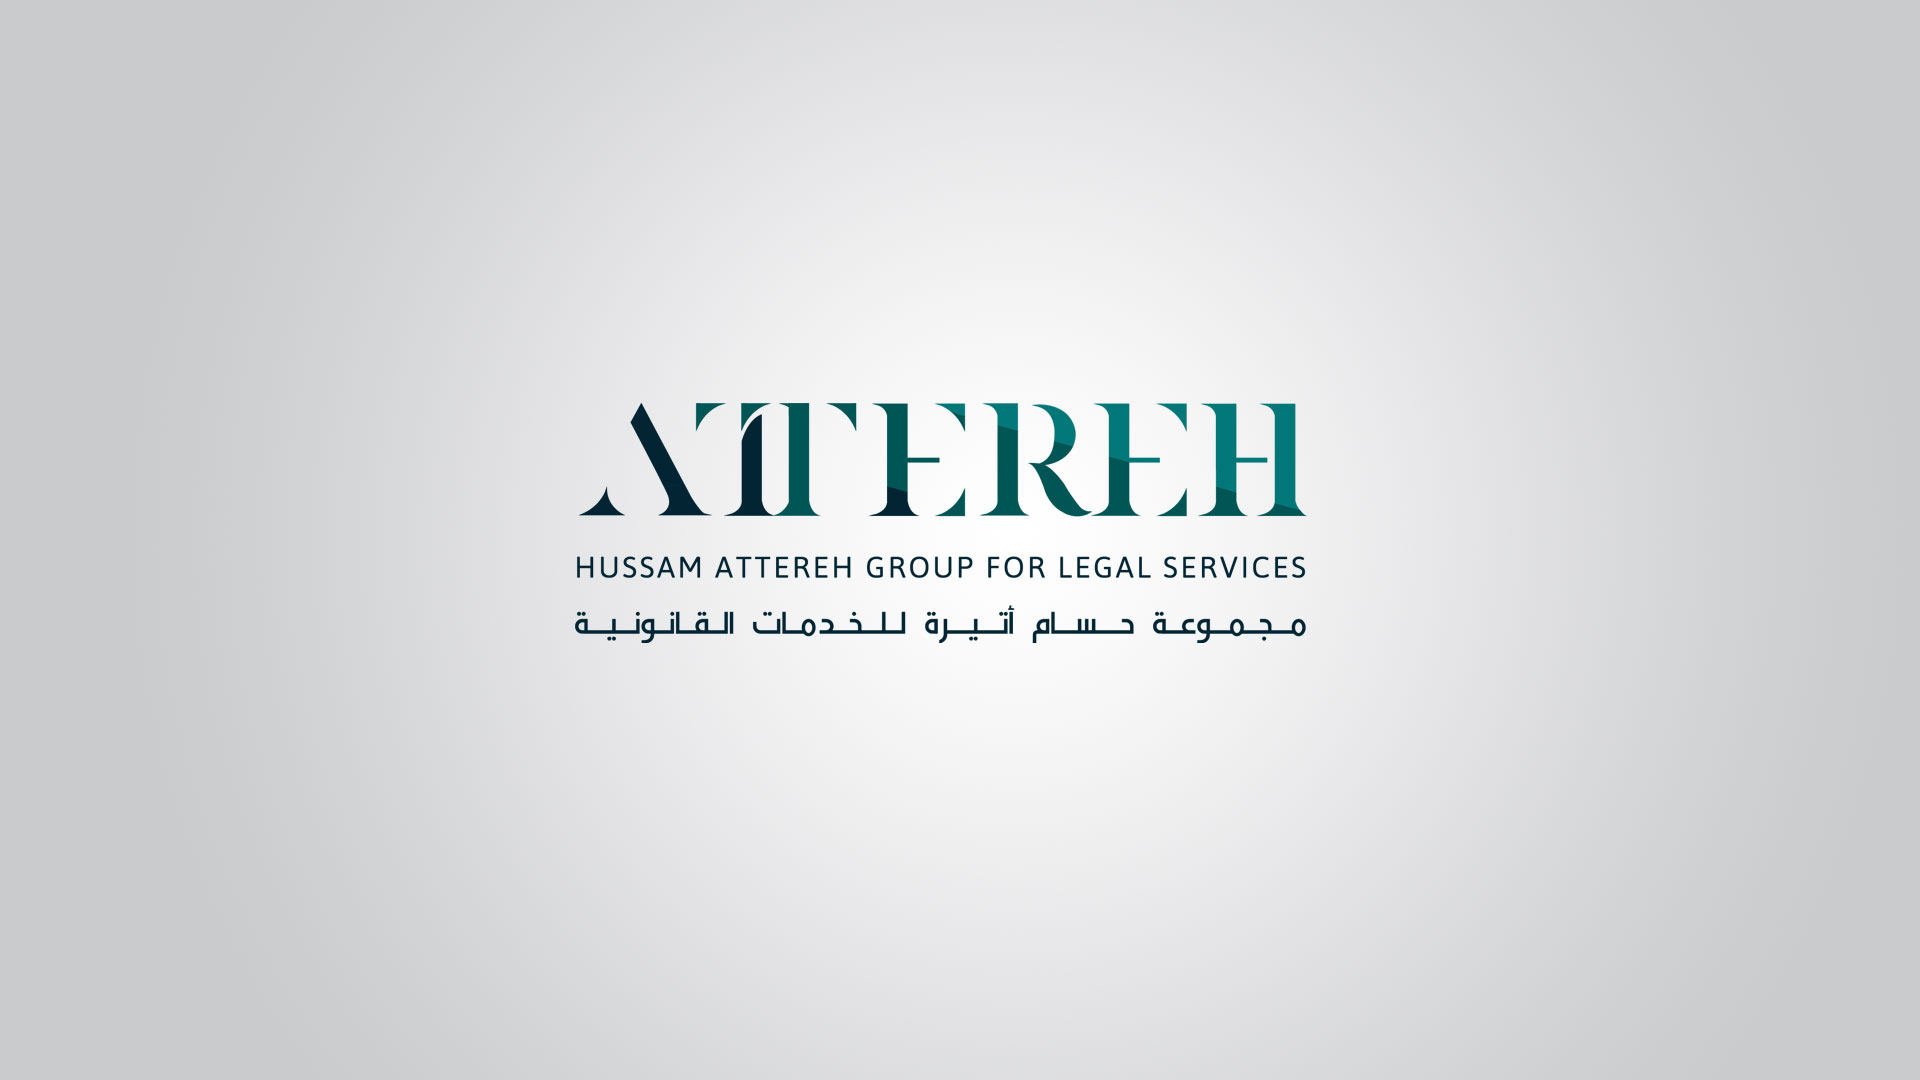 Hussam Attereh Group for Legal Services is ranked by Chambers and Partners as a Band 1 law firm in Palestine for the year 2022